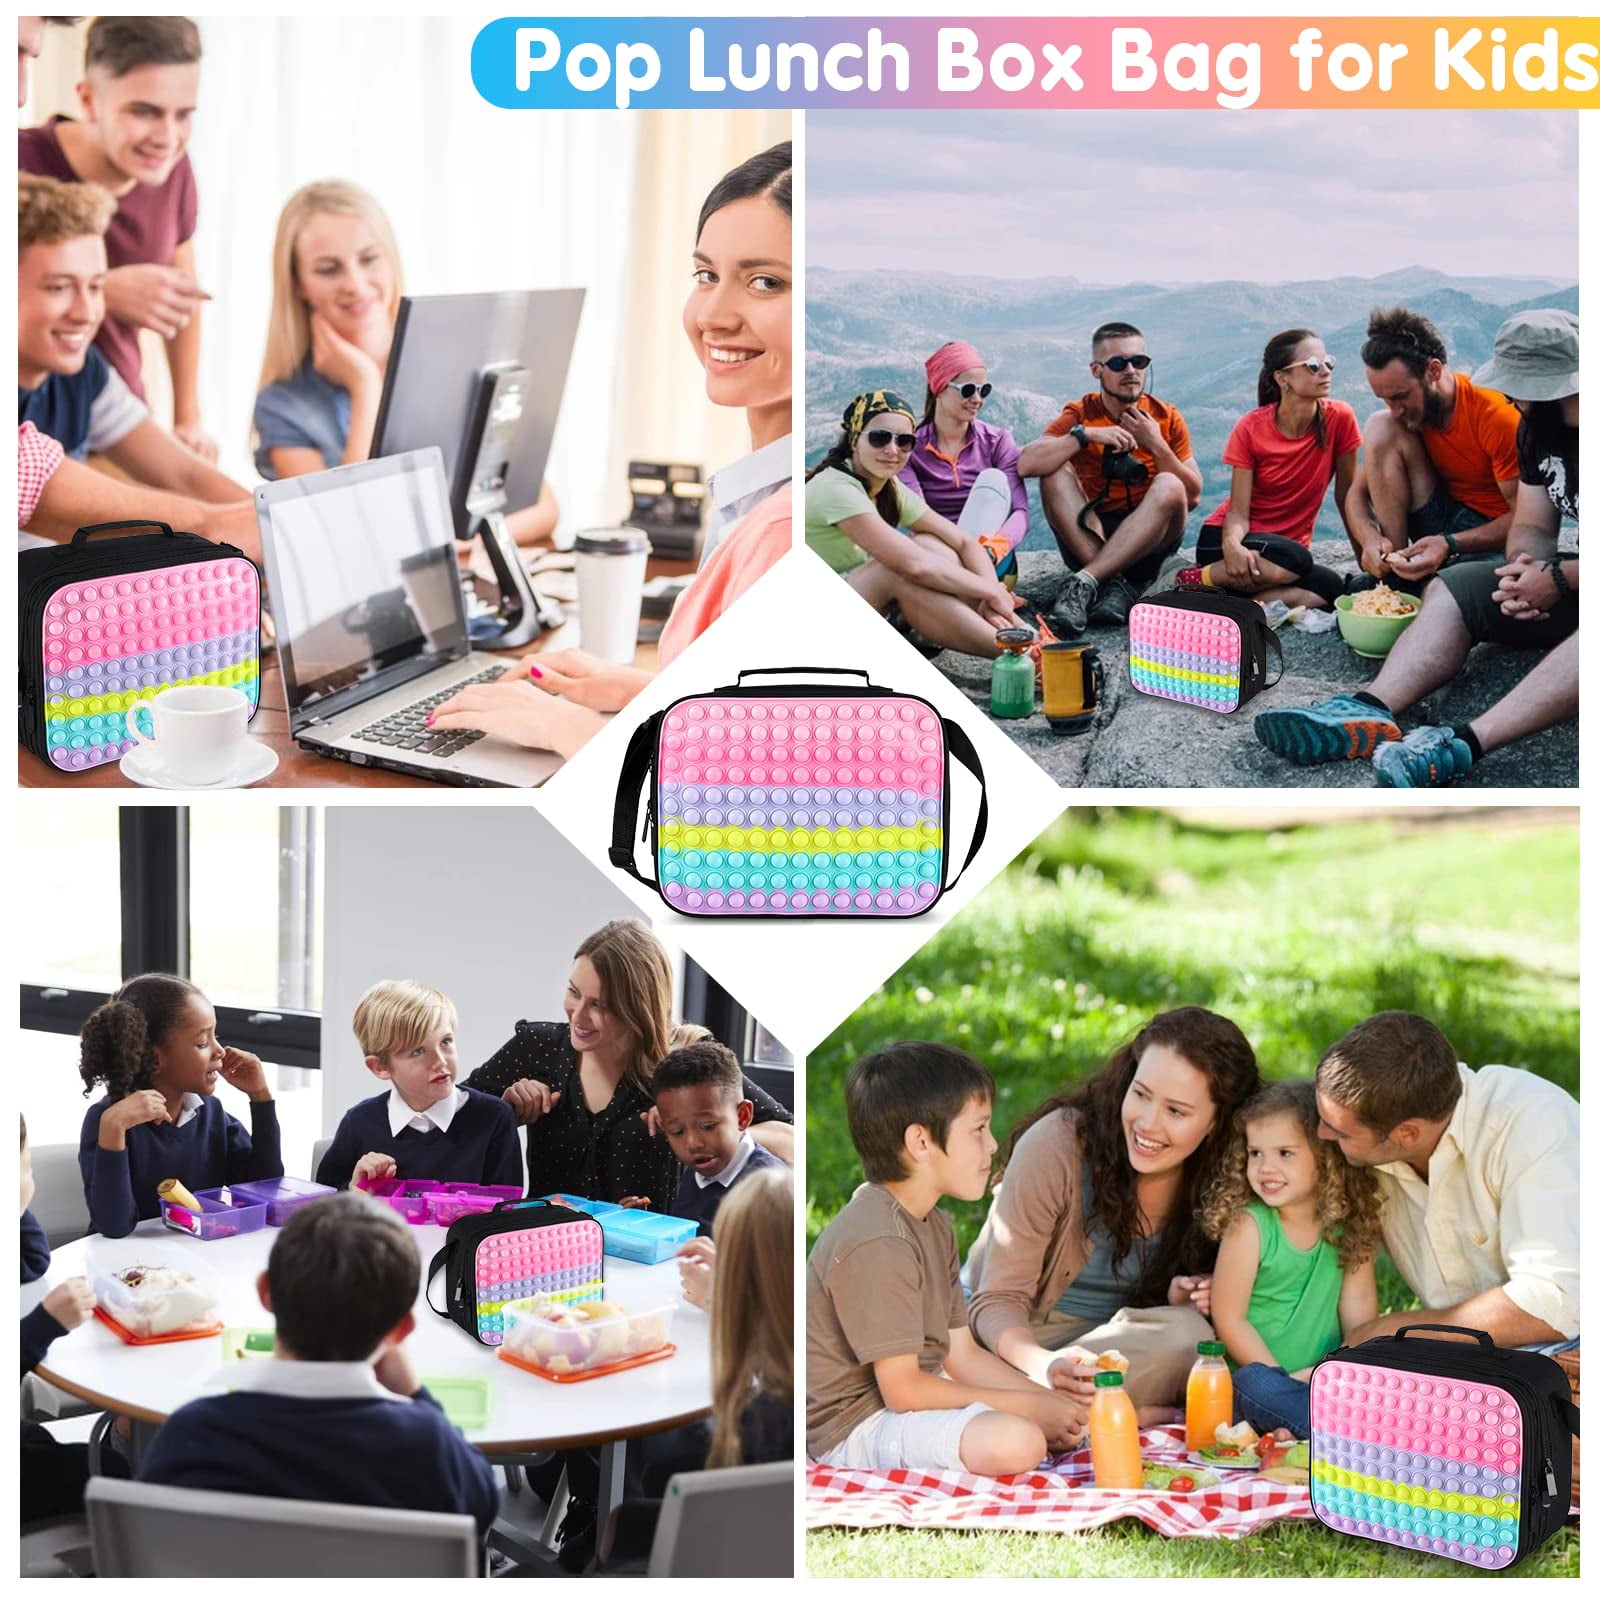 Ouryec Girls Lunch Boxes for School, Pop Kids Lunch Box Bag for Little  Girls, Christmas Insulated Lu…See more Ouryec Girls Lunch Boxes for School,  Pop